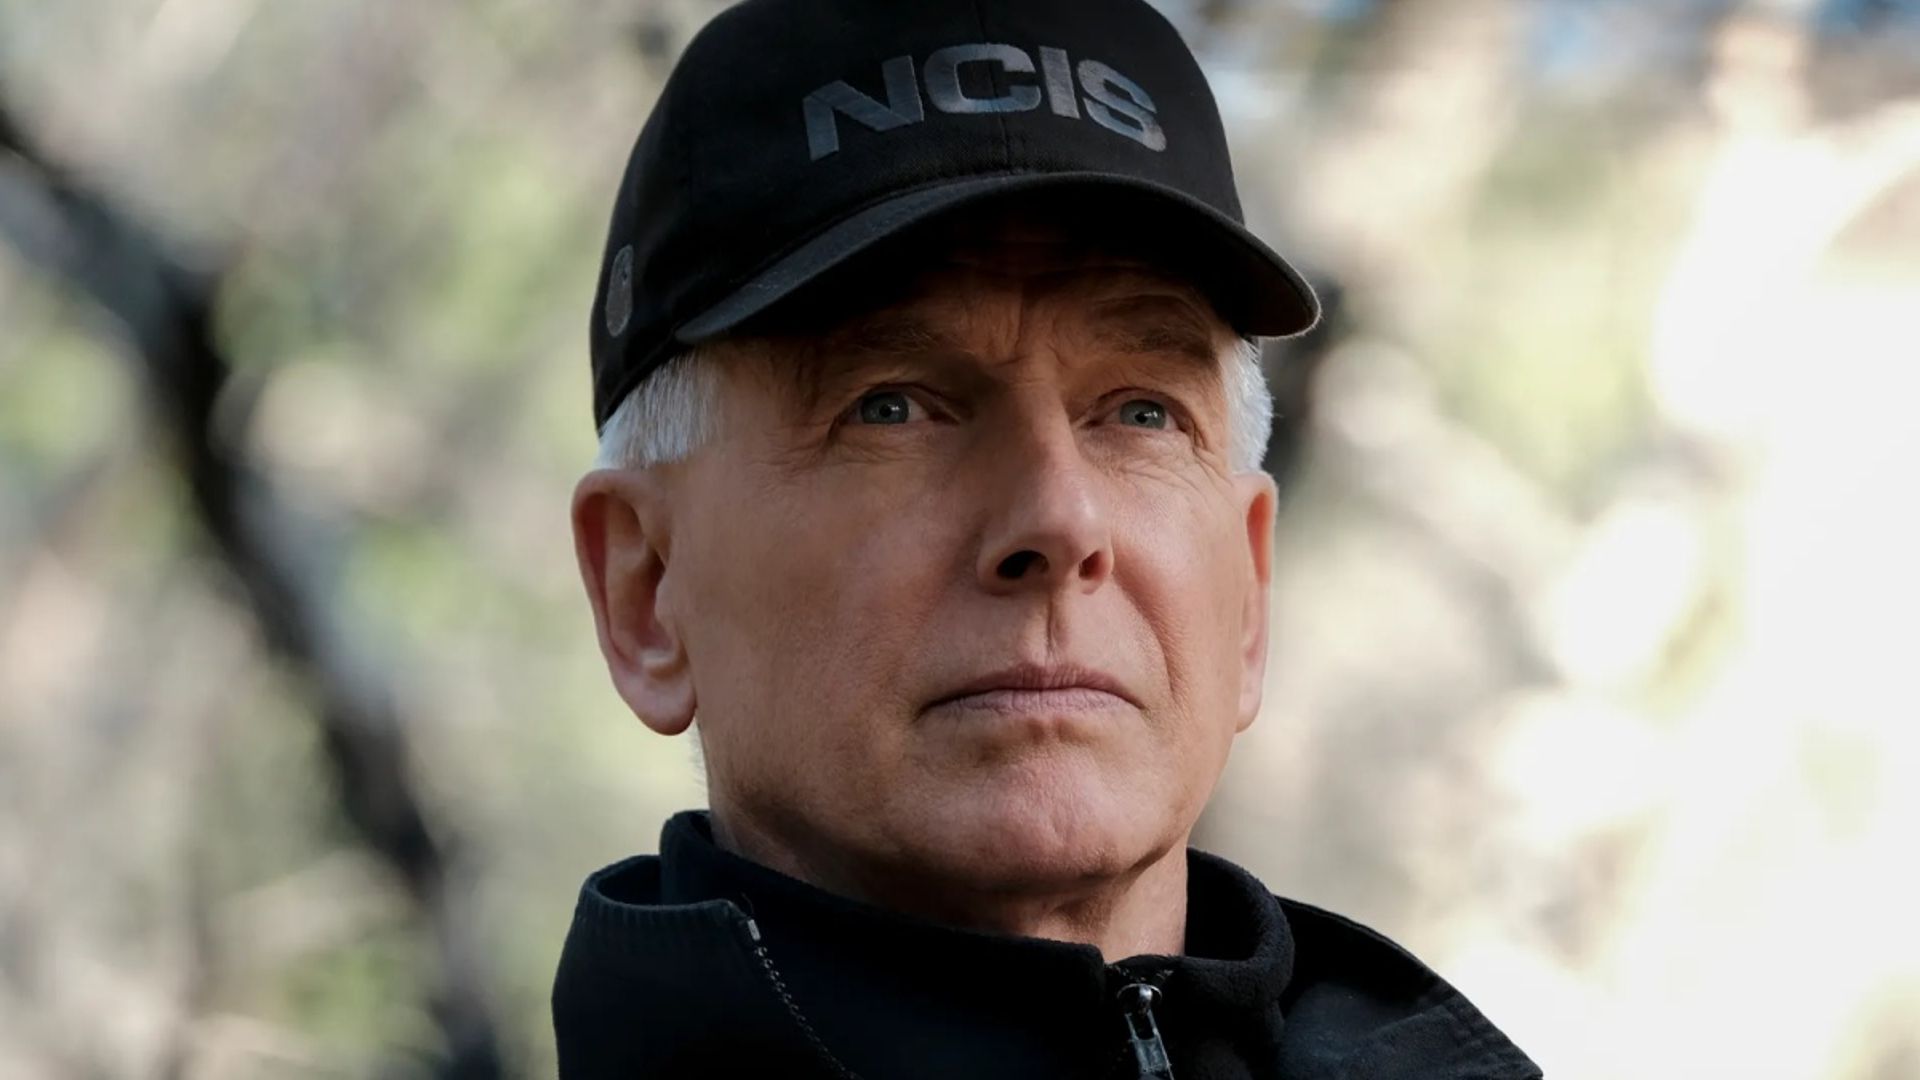 Jamie Lee Curtis shares sweet tribute to NCIS star Mark Harmon after he quits show